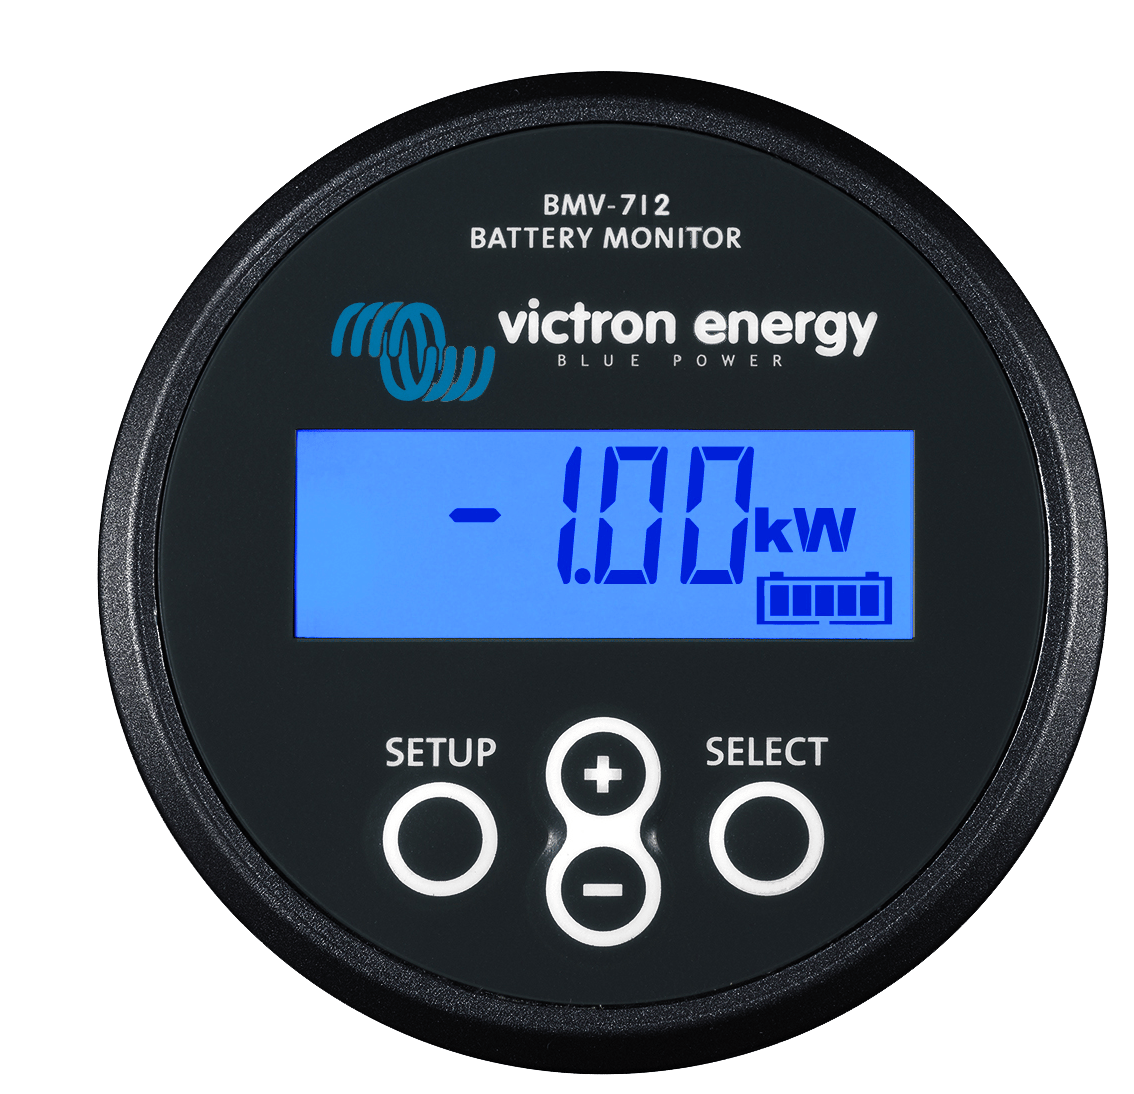 What's the max amp measurement of the included shunt in a Victron Energy BMV 712?